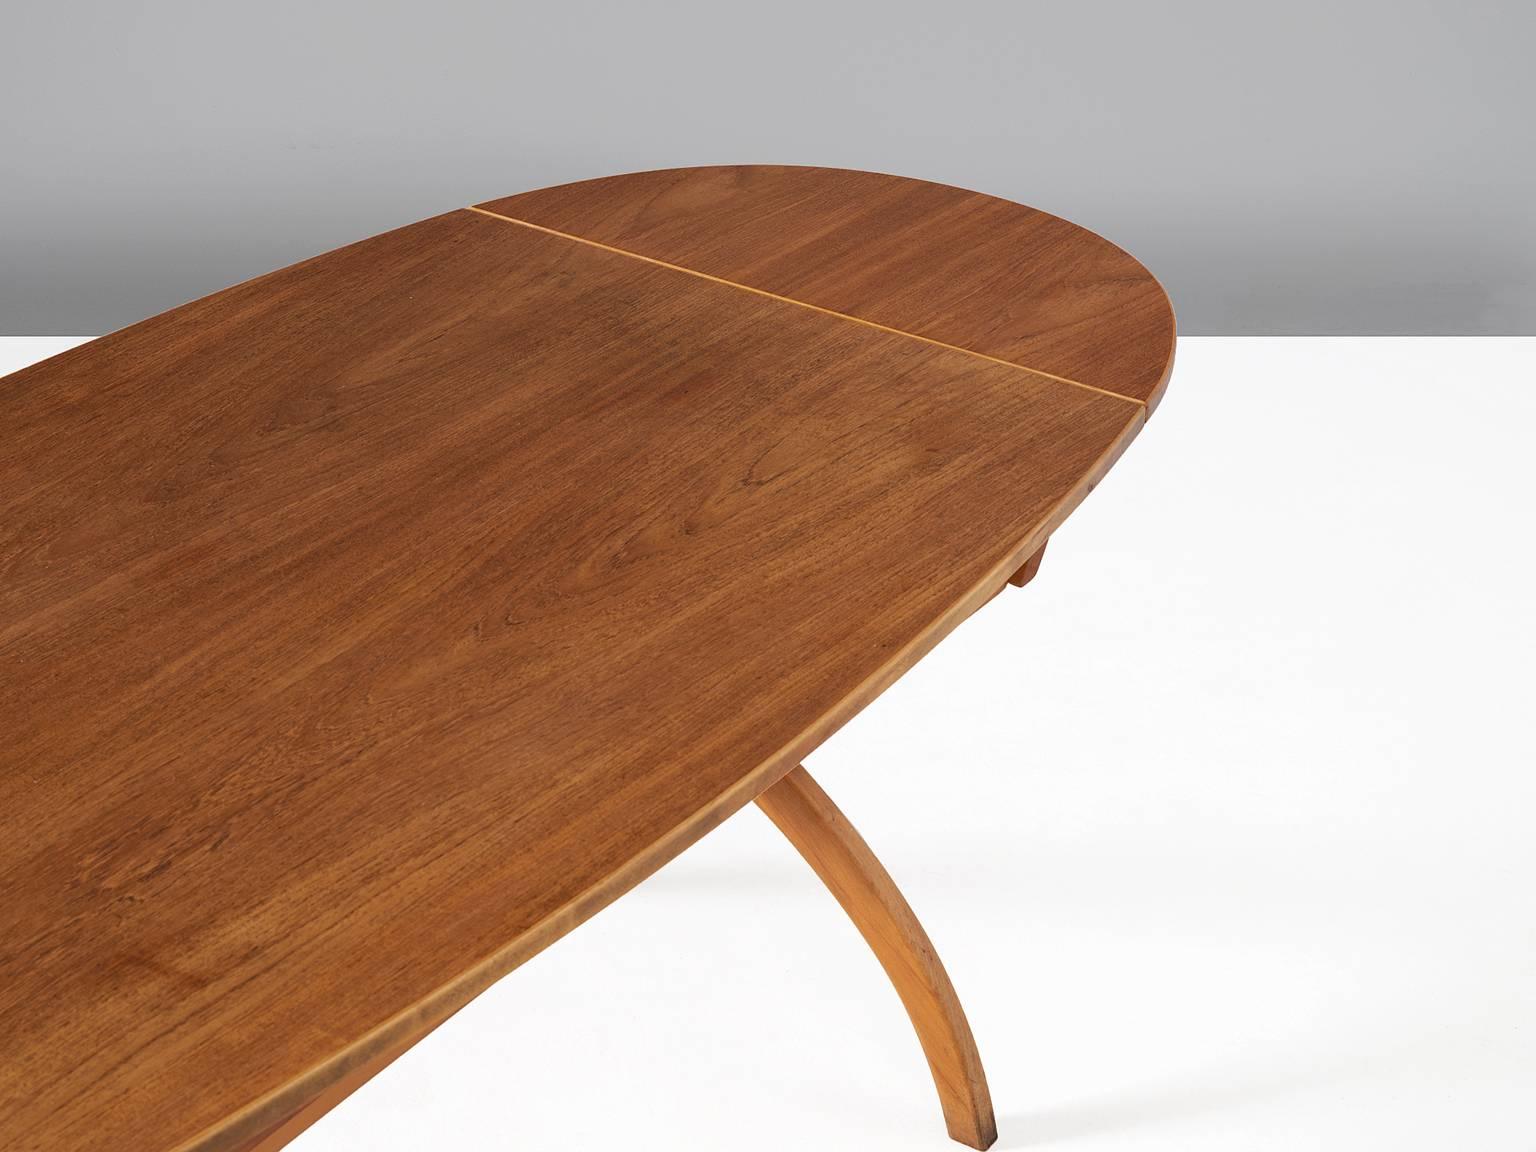 Desk, in teak and beech, by Børge Mogensen, Denmark, 1960s. 

Oval shaped drop-leaf table by Danish Designer Børge Mogensen. The table consist of an X-shaped base with two legs and an oval top with drop-leafs. Under the top are two drawers. This